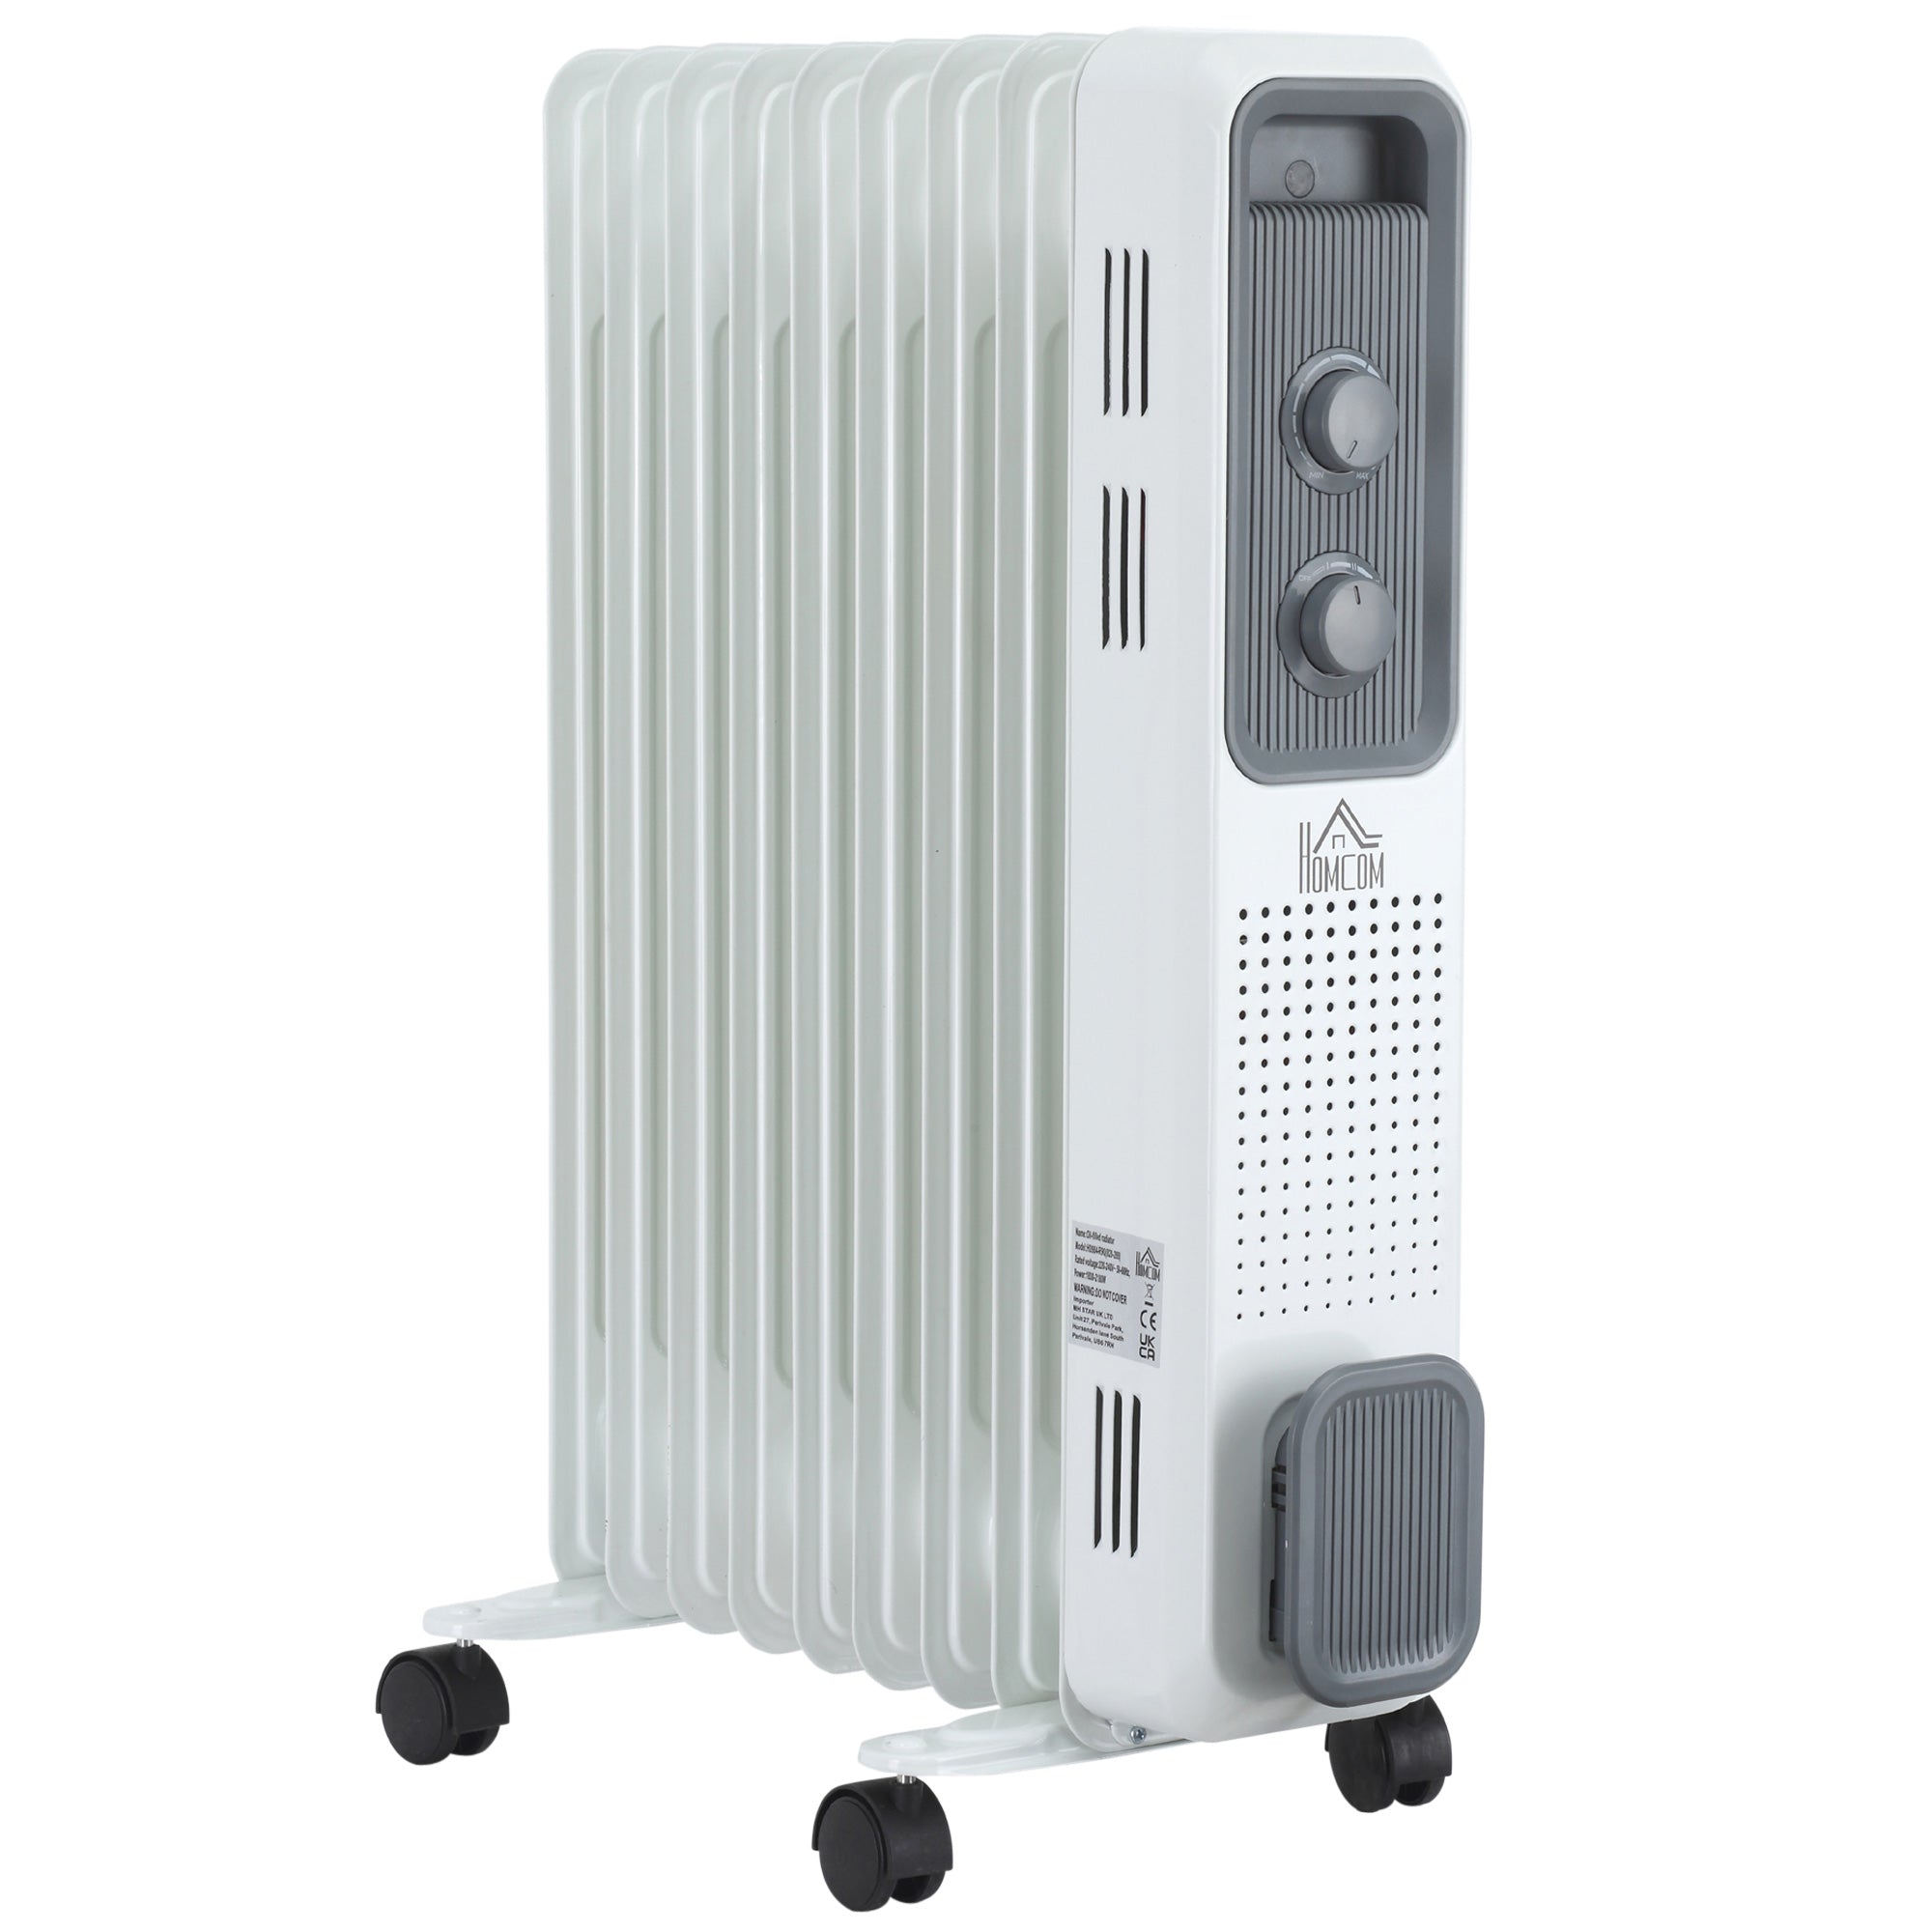 2180W Oil Filled Radiator, Portable Electric Heater, w/ Built-in 24-Hour Timer, 3 Heat Settings, Adjustable Thermostat, Safe Power-Off-0